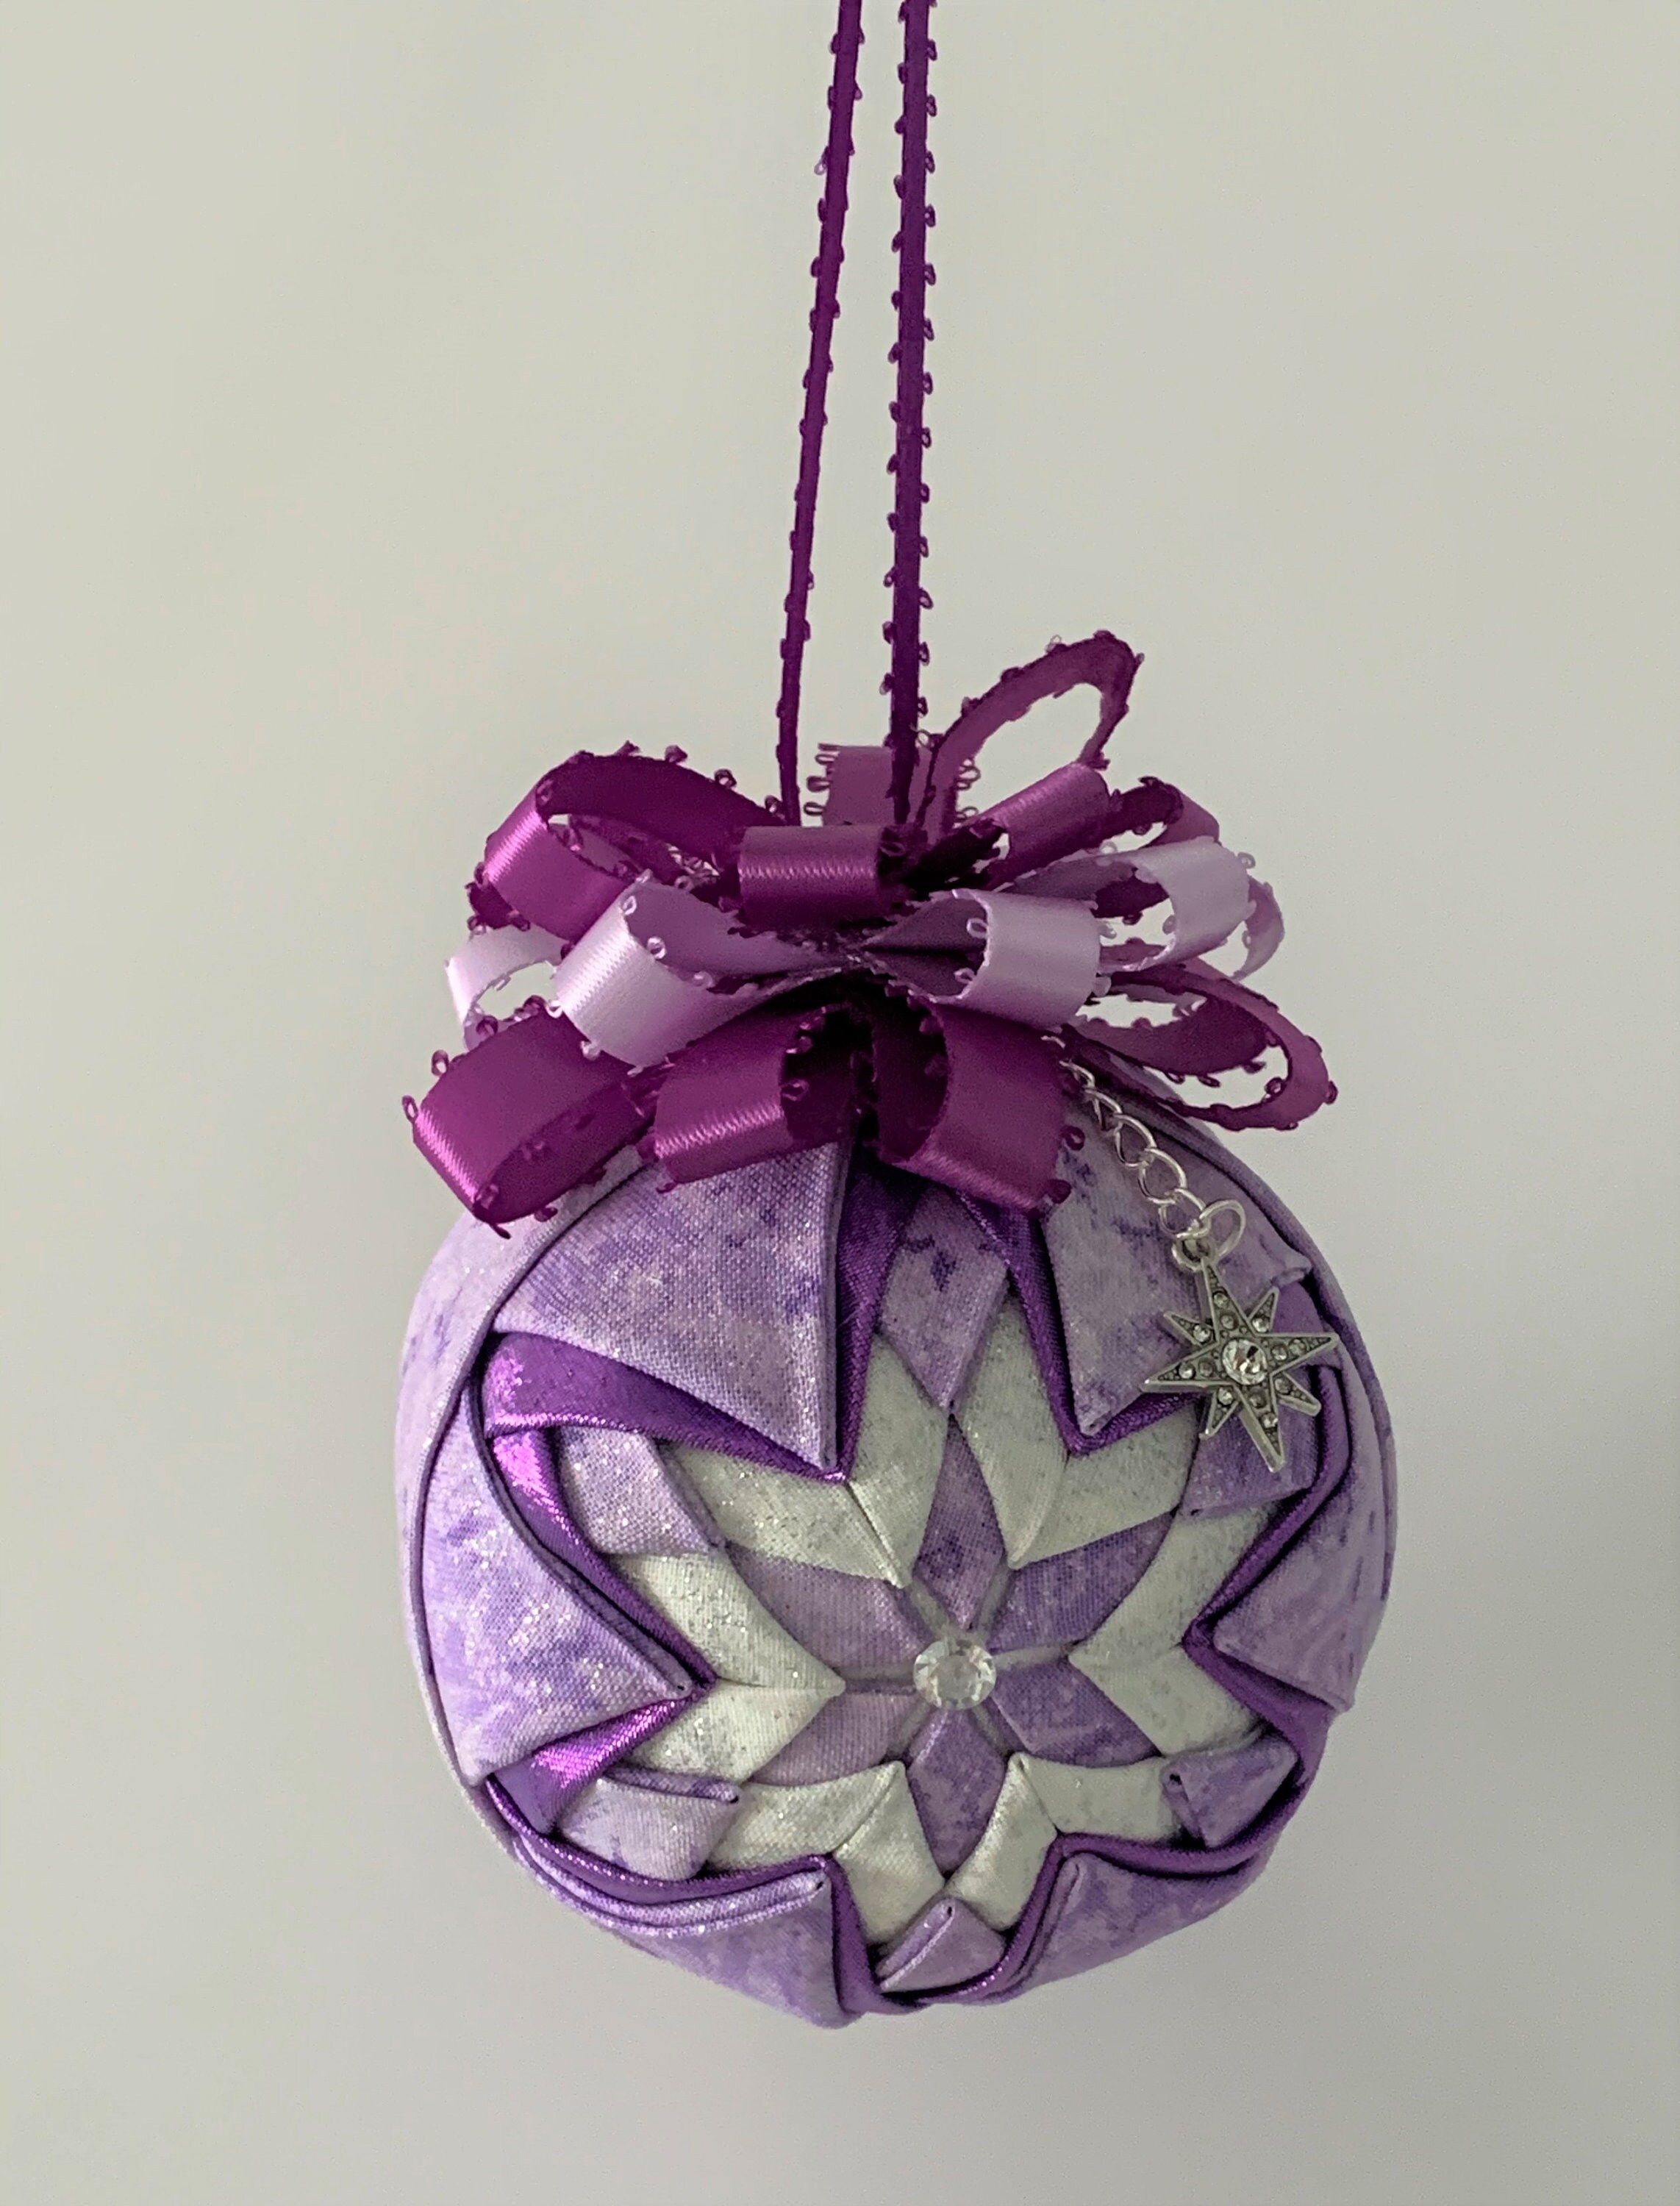 Quilted Handmade Purple White Fabric No Sew 3 Ornament Tree Hanger Polka Dots Flowers Beads